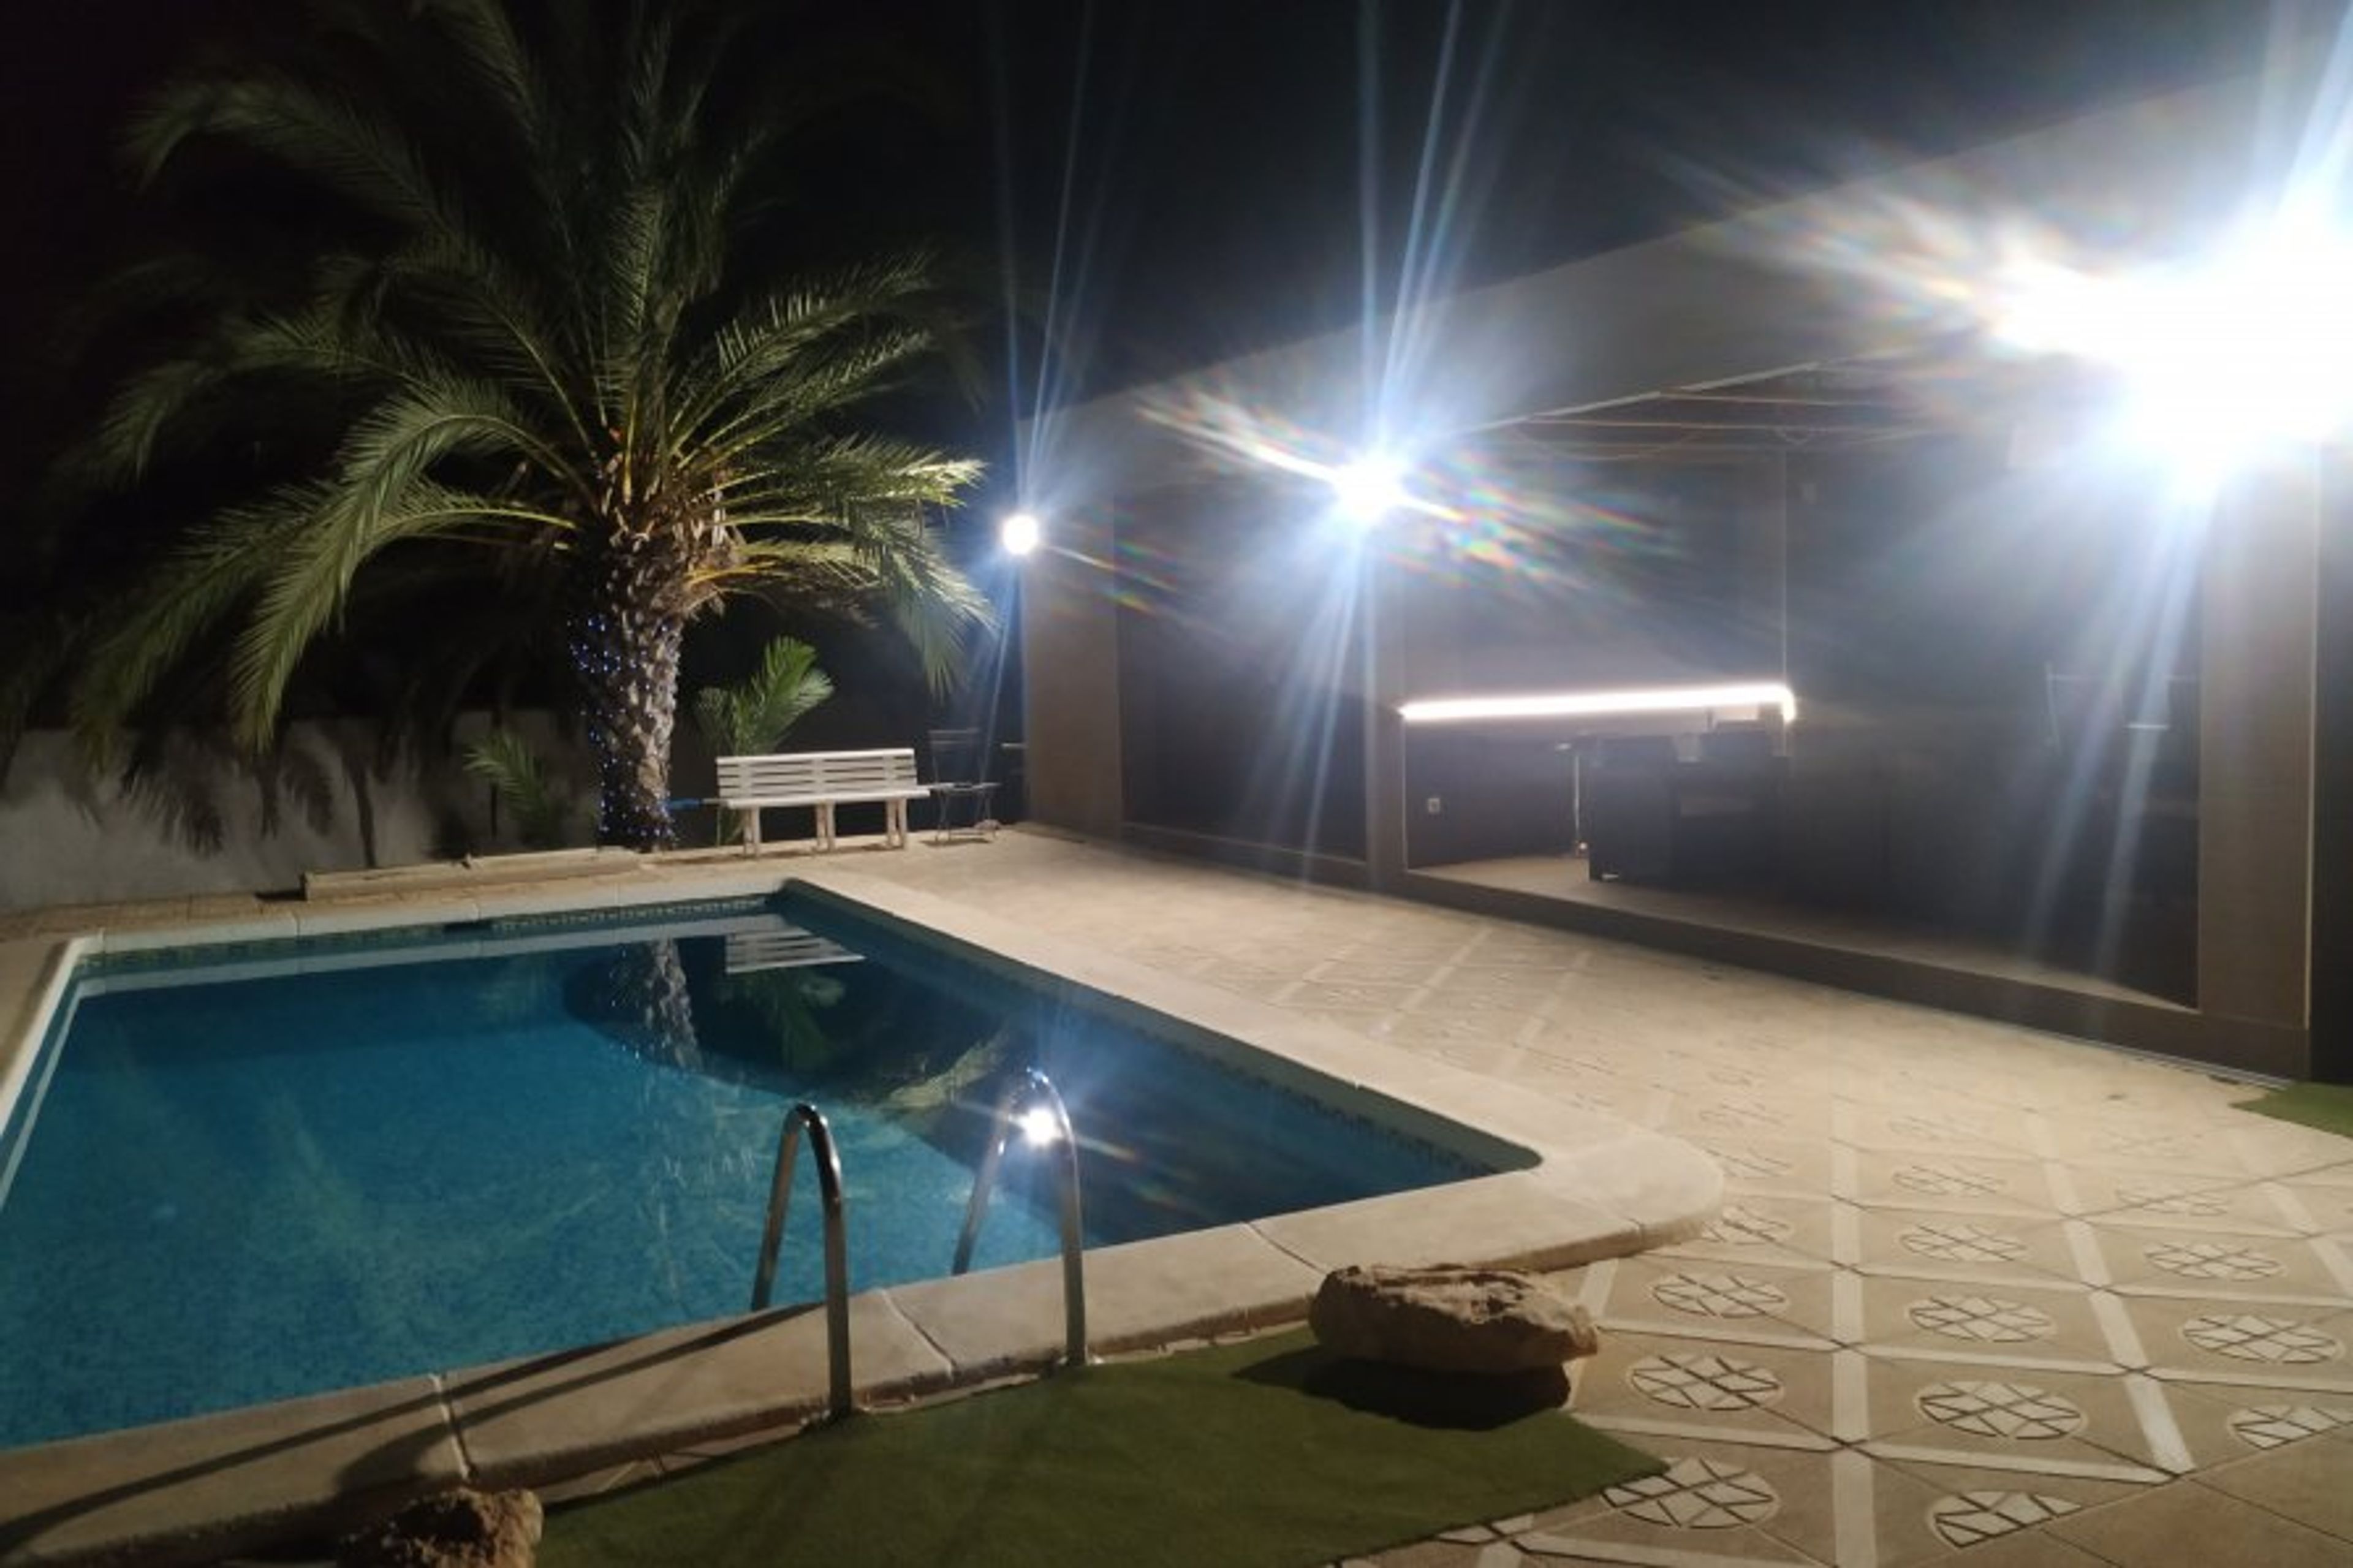 Pool and poolhouse at night